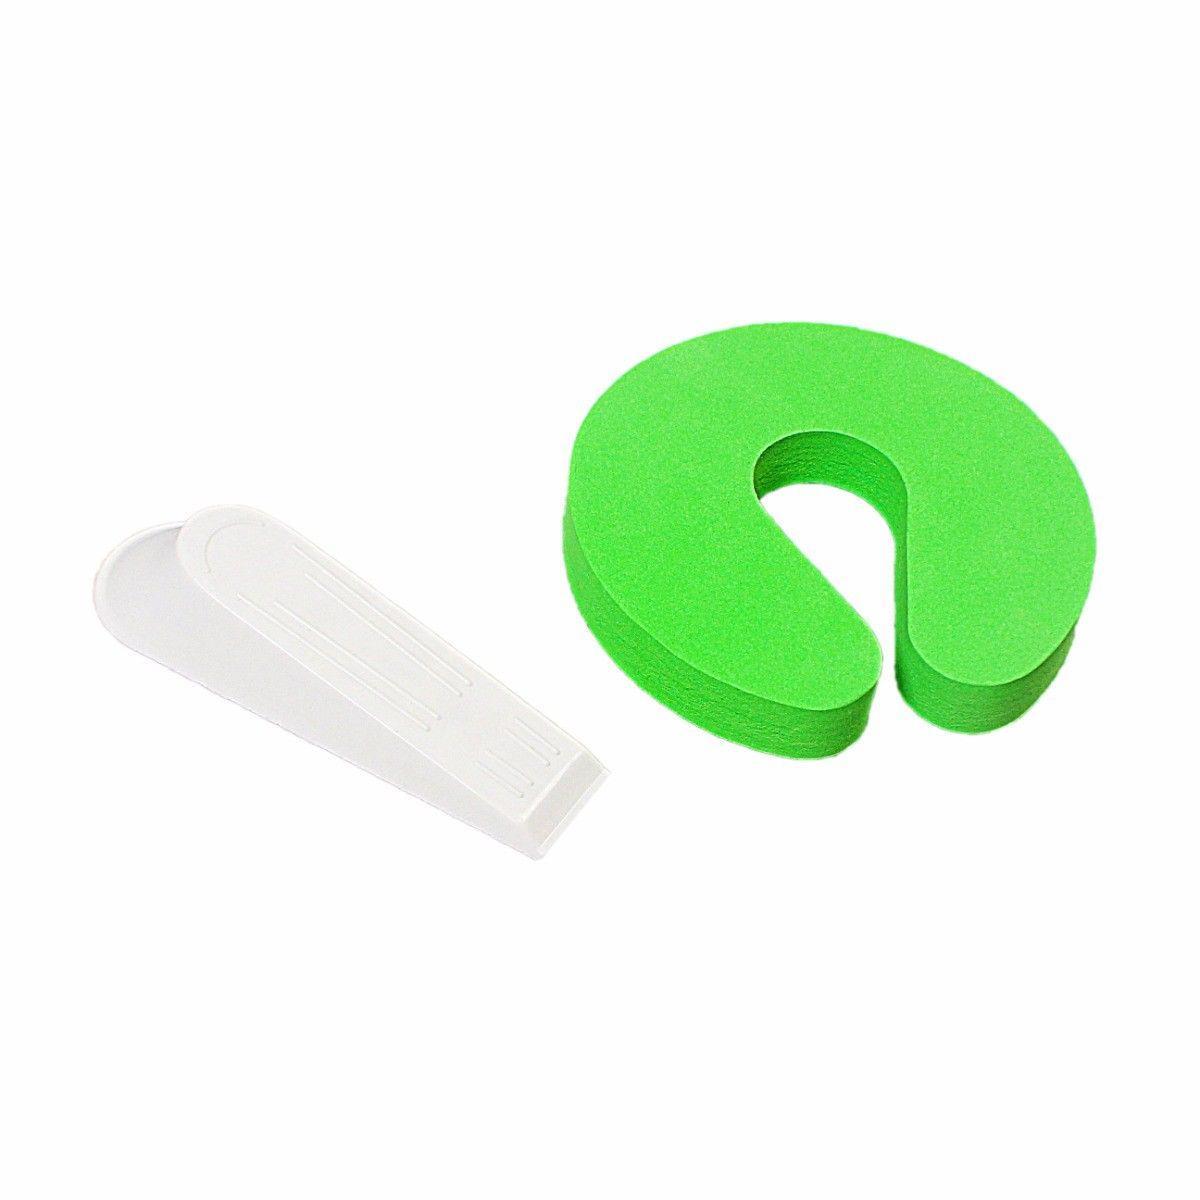 Foam and Plastic Door Stopper Set of 2 Assorted Colours 2167 (Large Letter Rate)